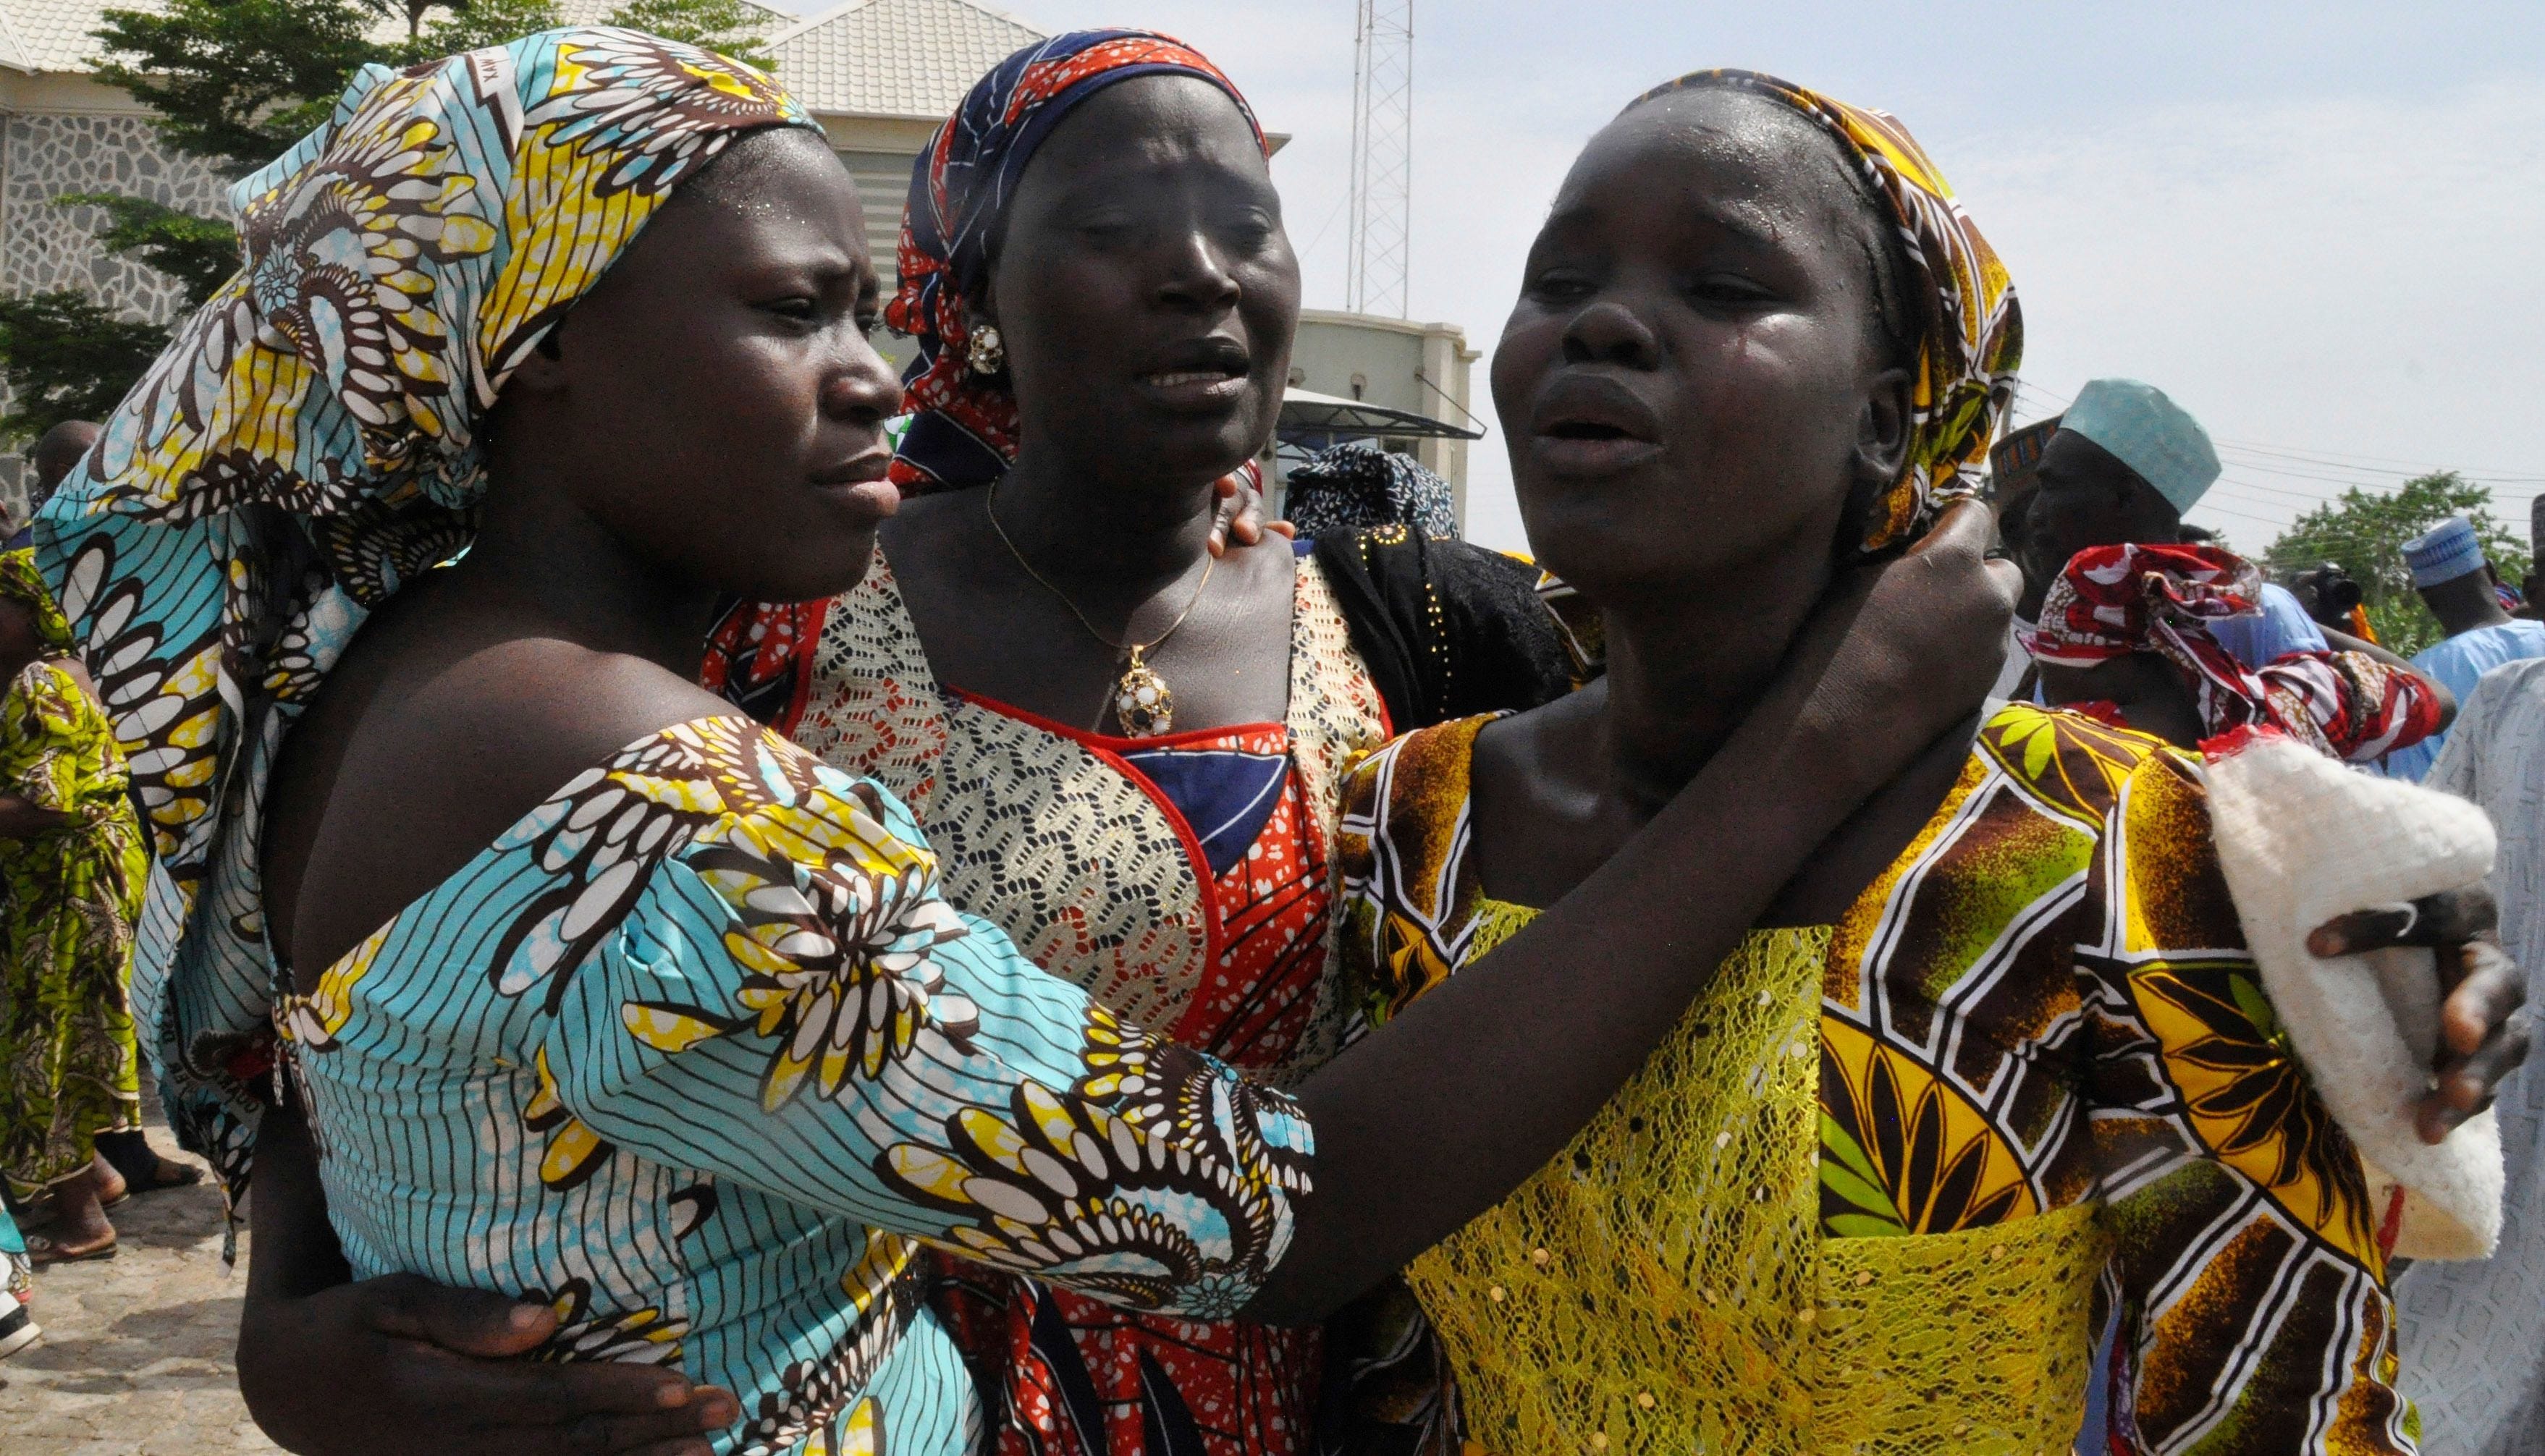 50 Girls Missing From Nigerian Town After Boko Haram Attack 